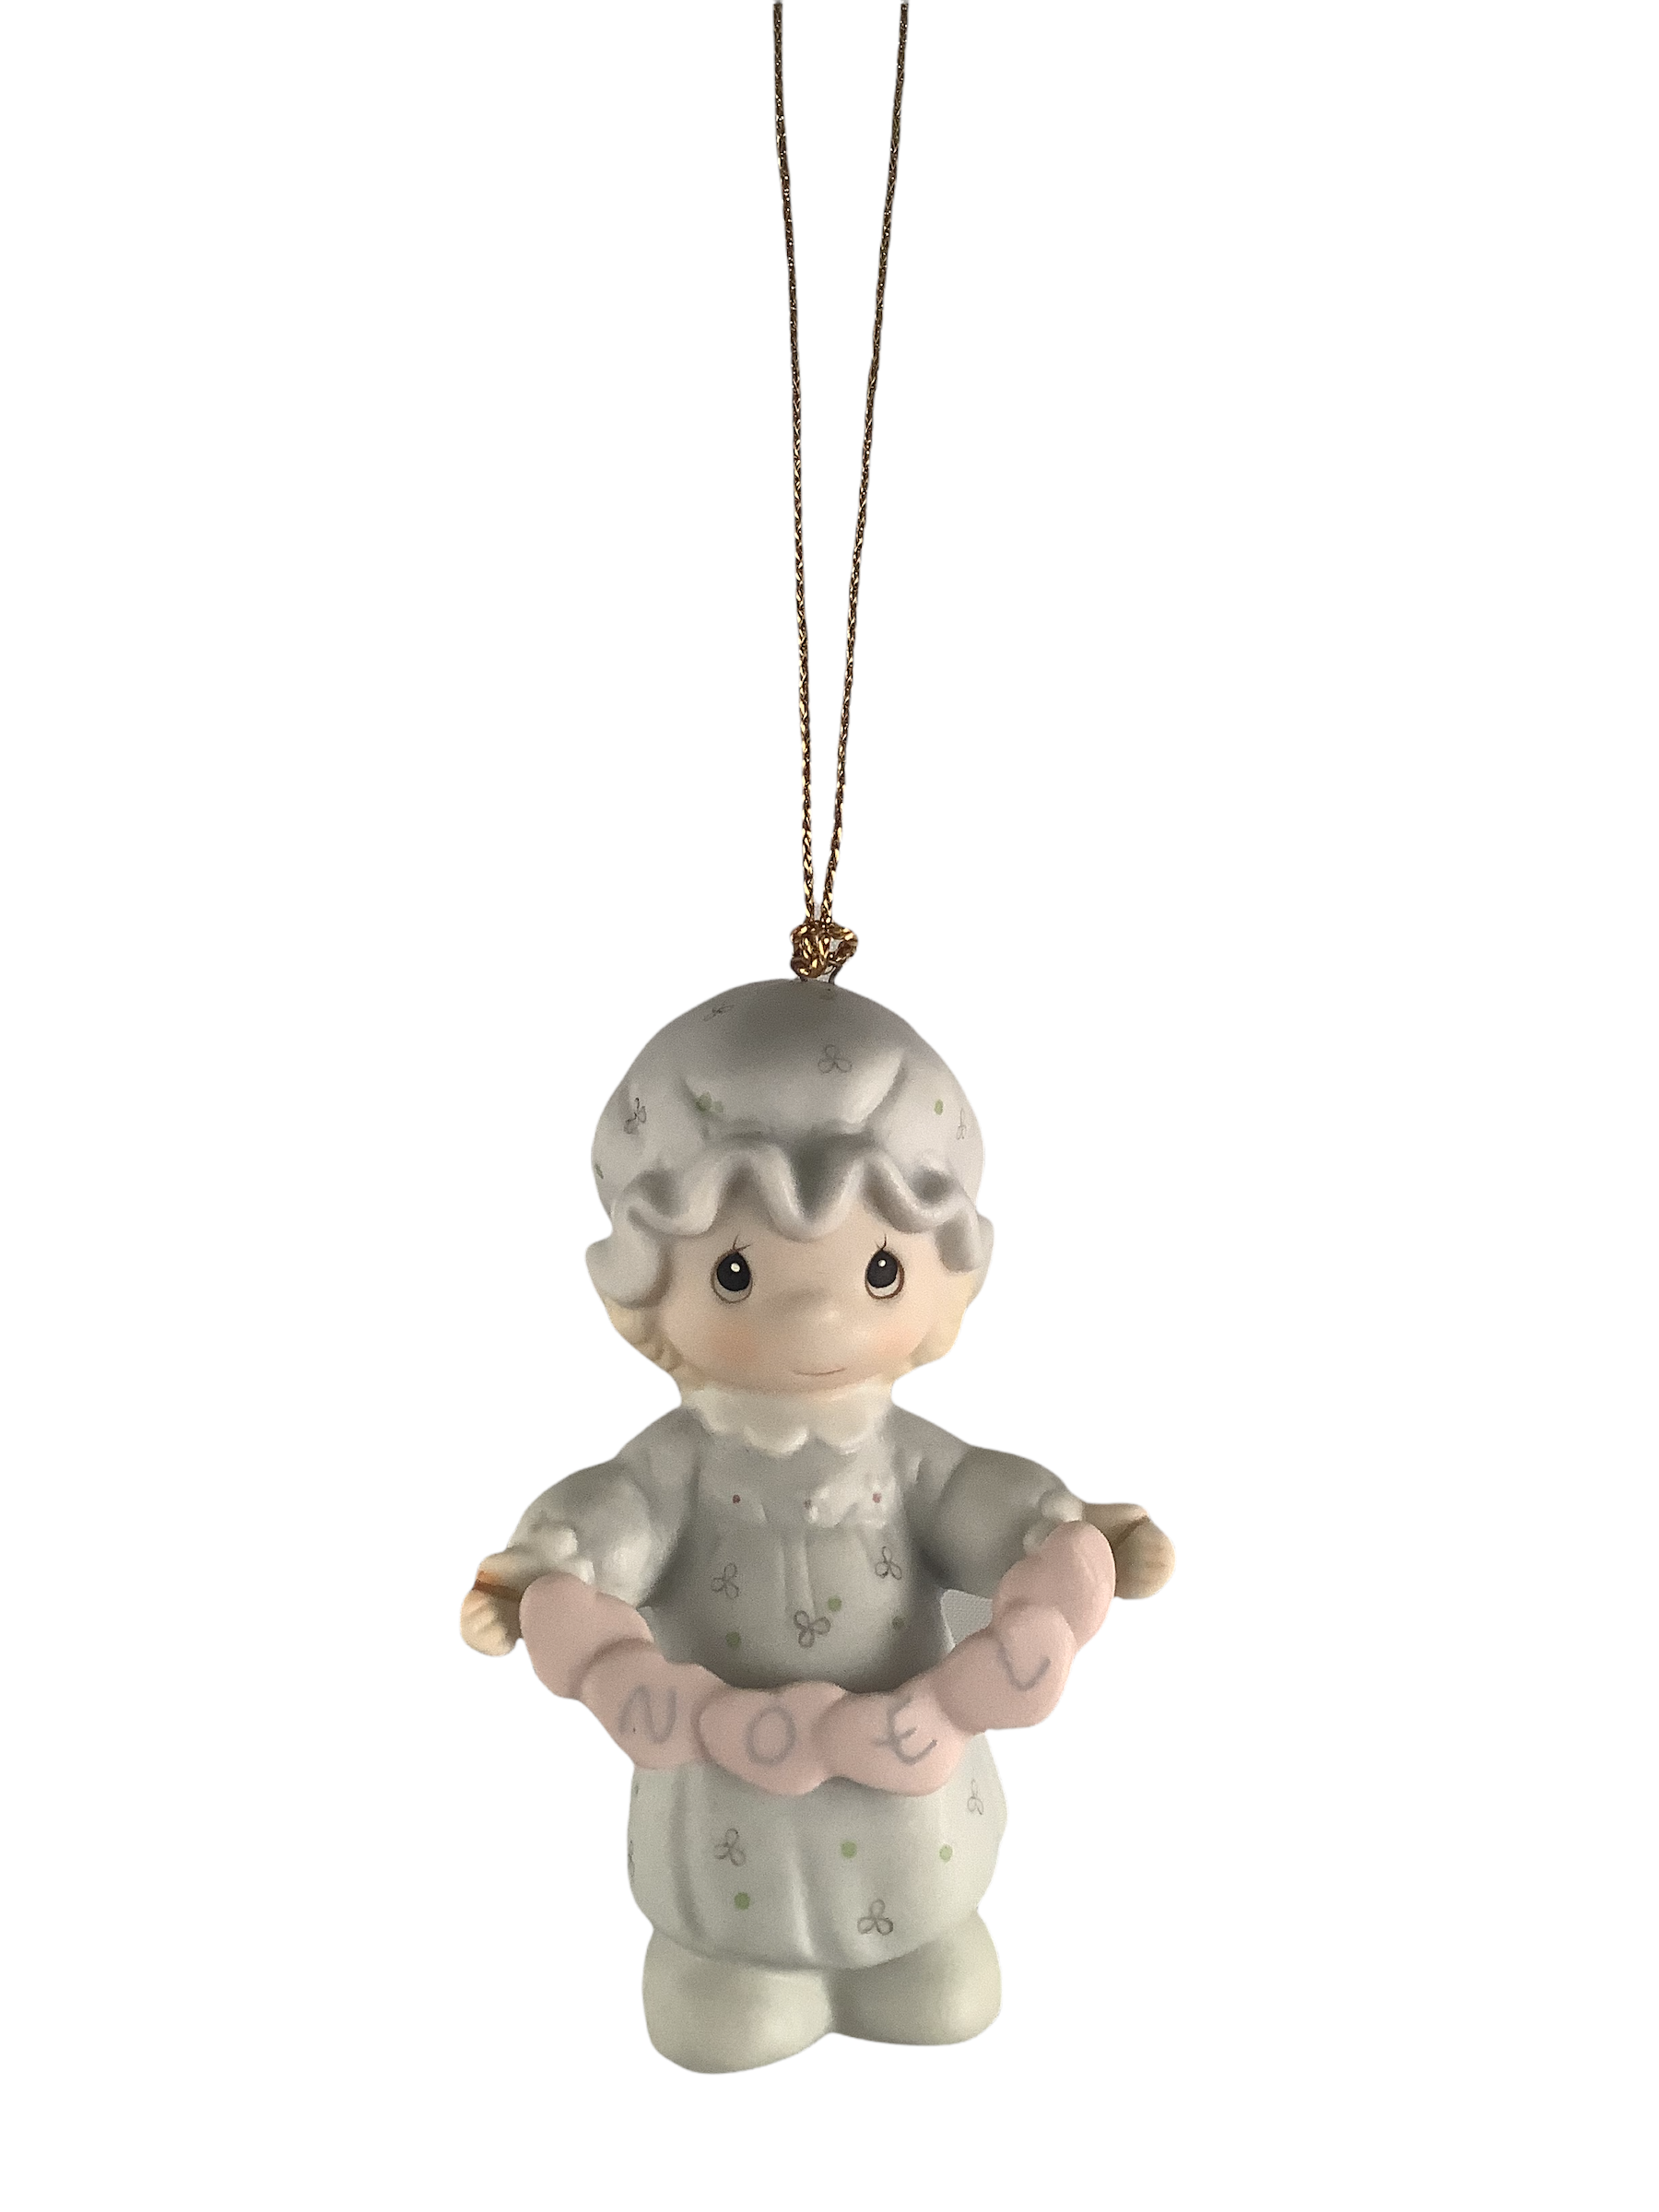 You Have Touched So Many Hearts - Precious Moment Ornament